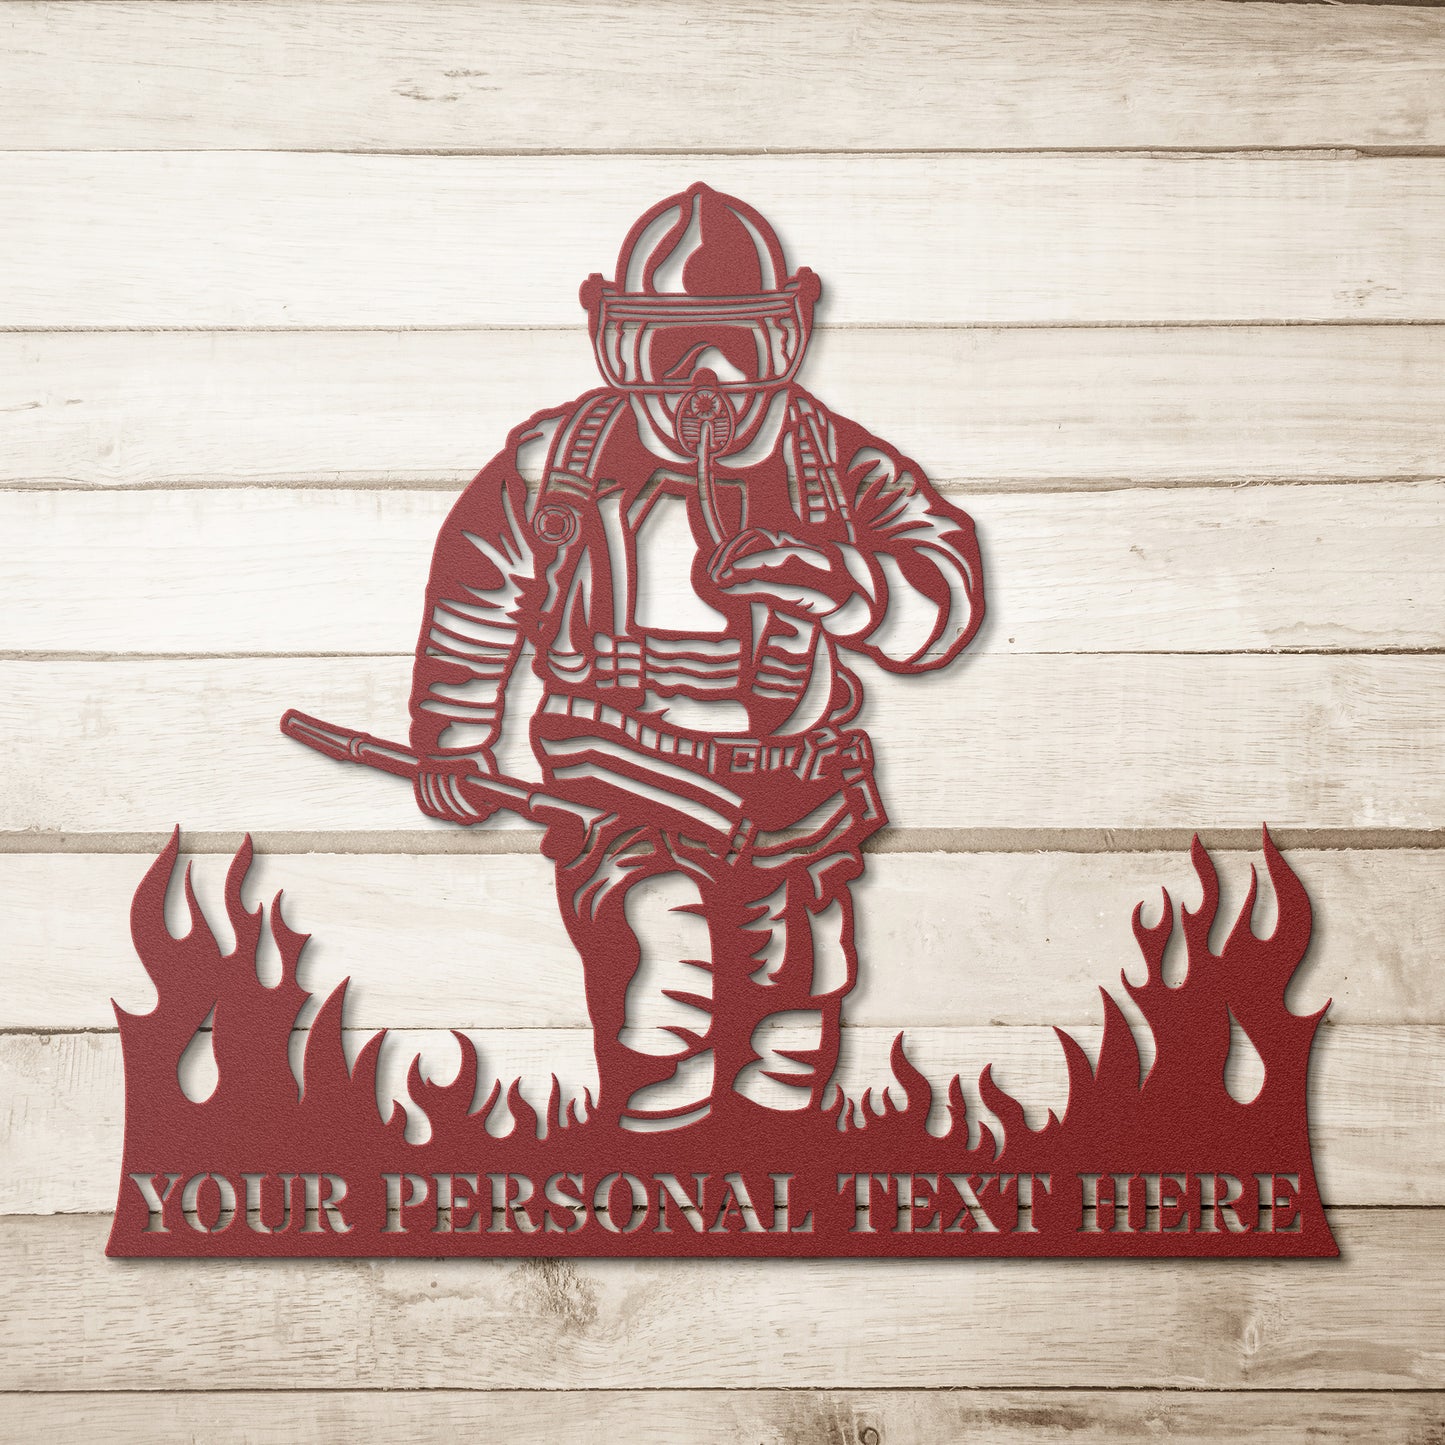 Personalized Fireman In Flames Name Metal Art. Custom Firefighter Volunteer Wall Decor. Customize Fire department Wall Hanging. To My Hero